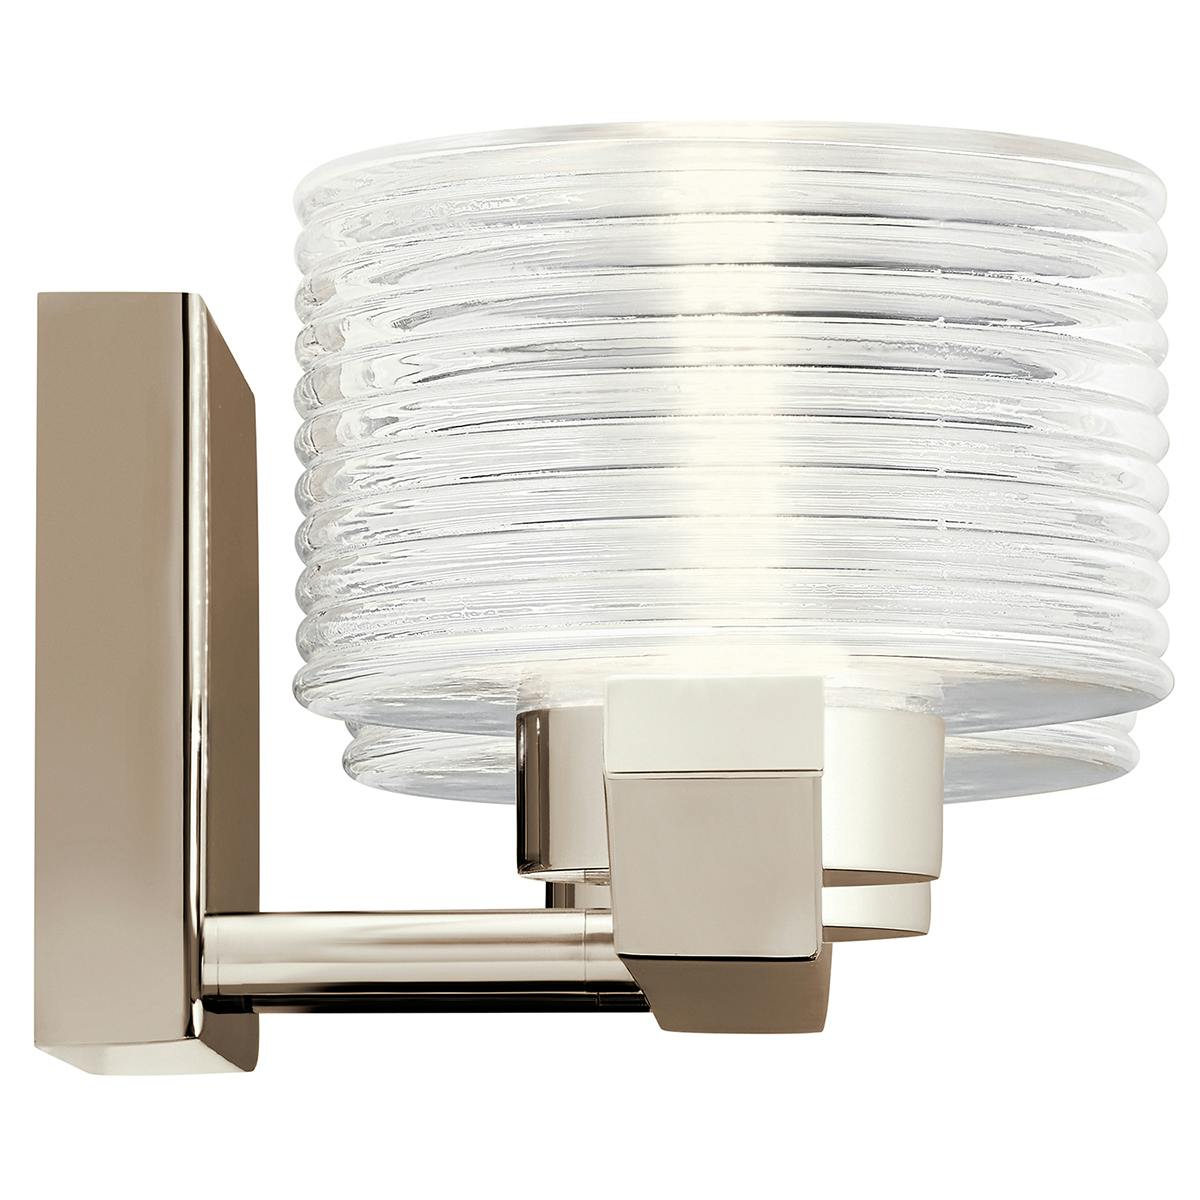 Profile view of the Lasus 2 Light LED Vanity Light Nickel on a white background